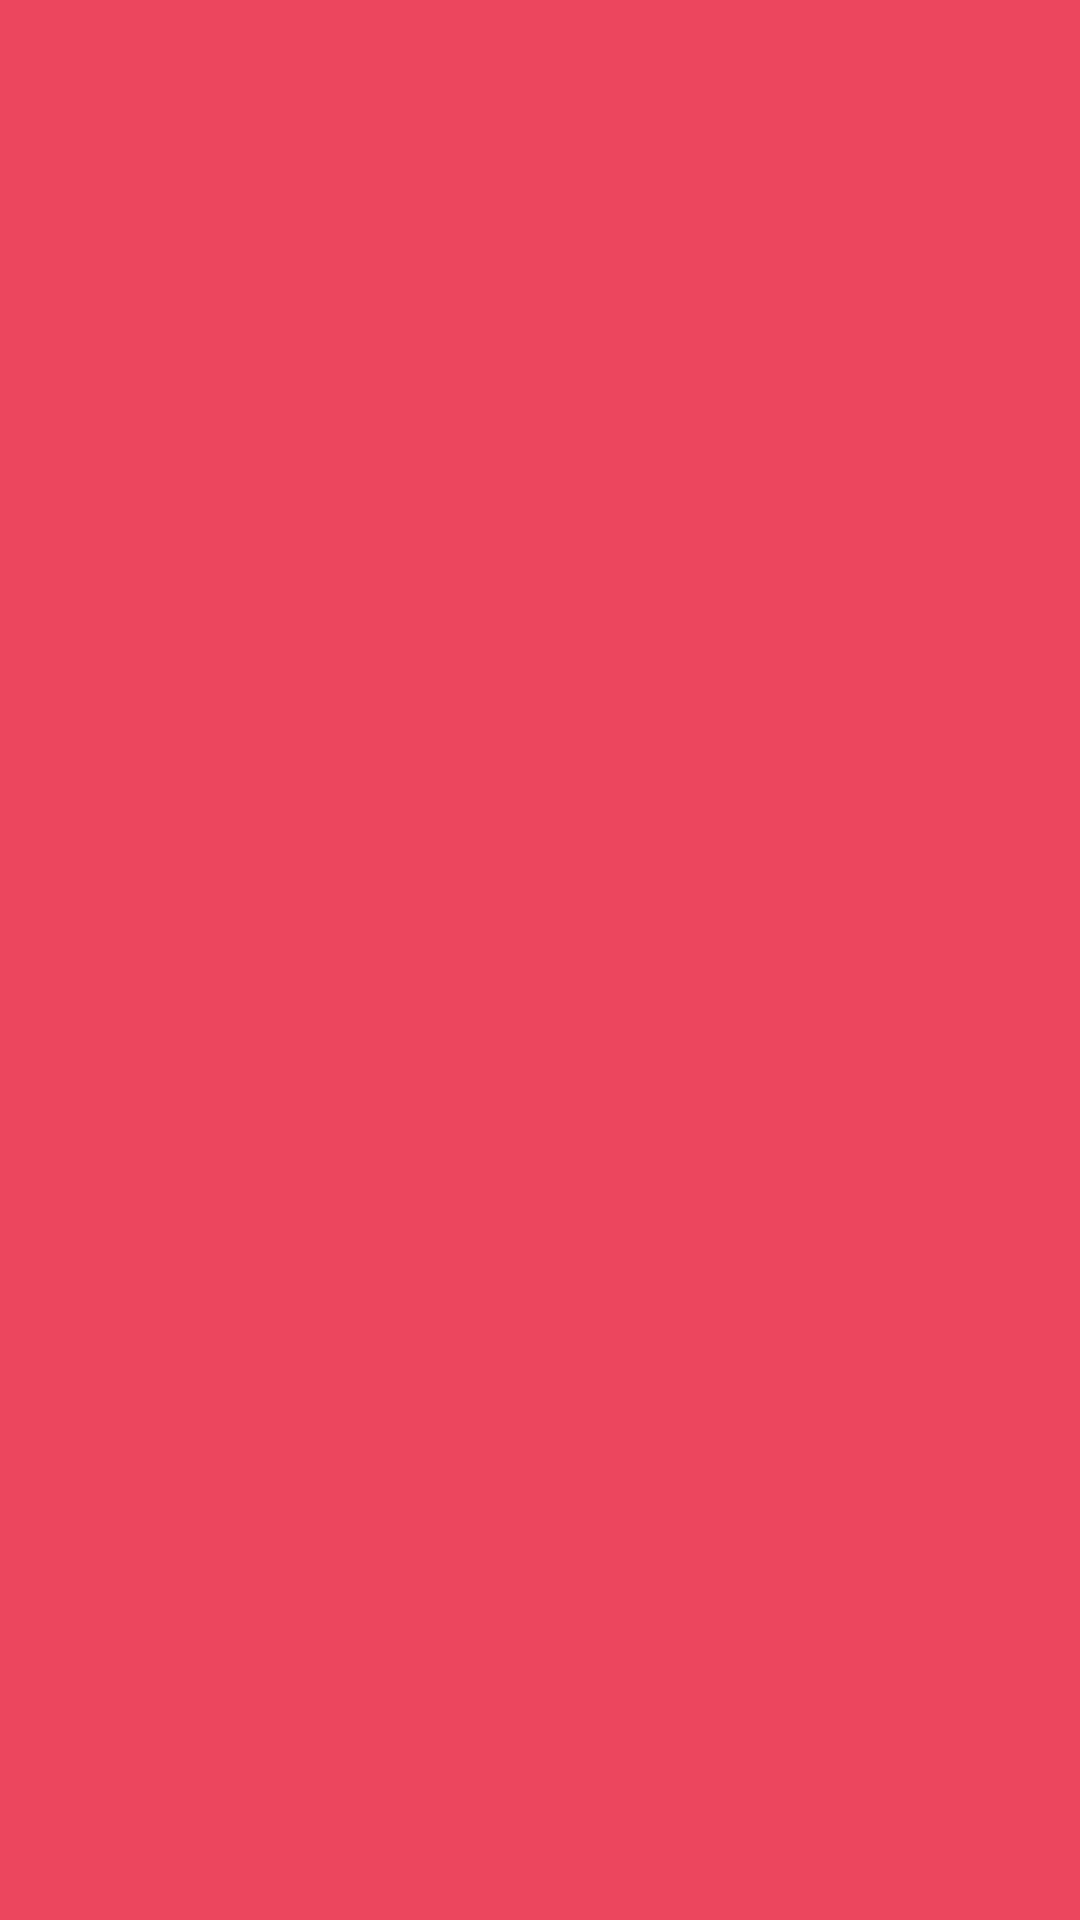 Pink Solid Color Fuchsia Phone Wallpaper